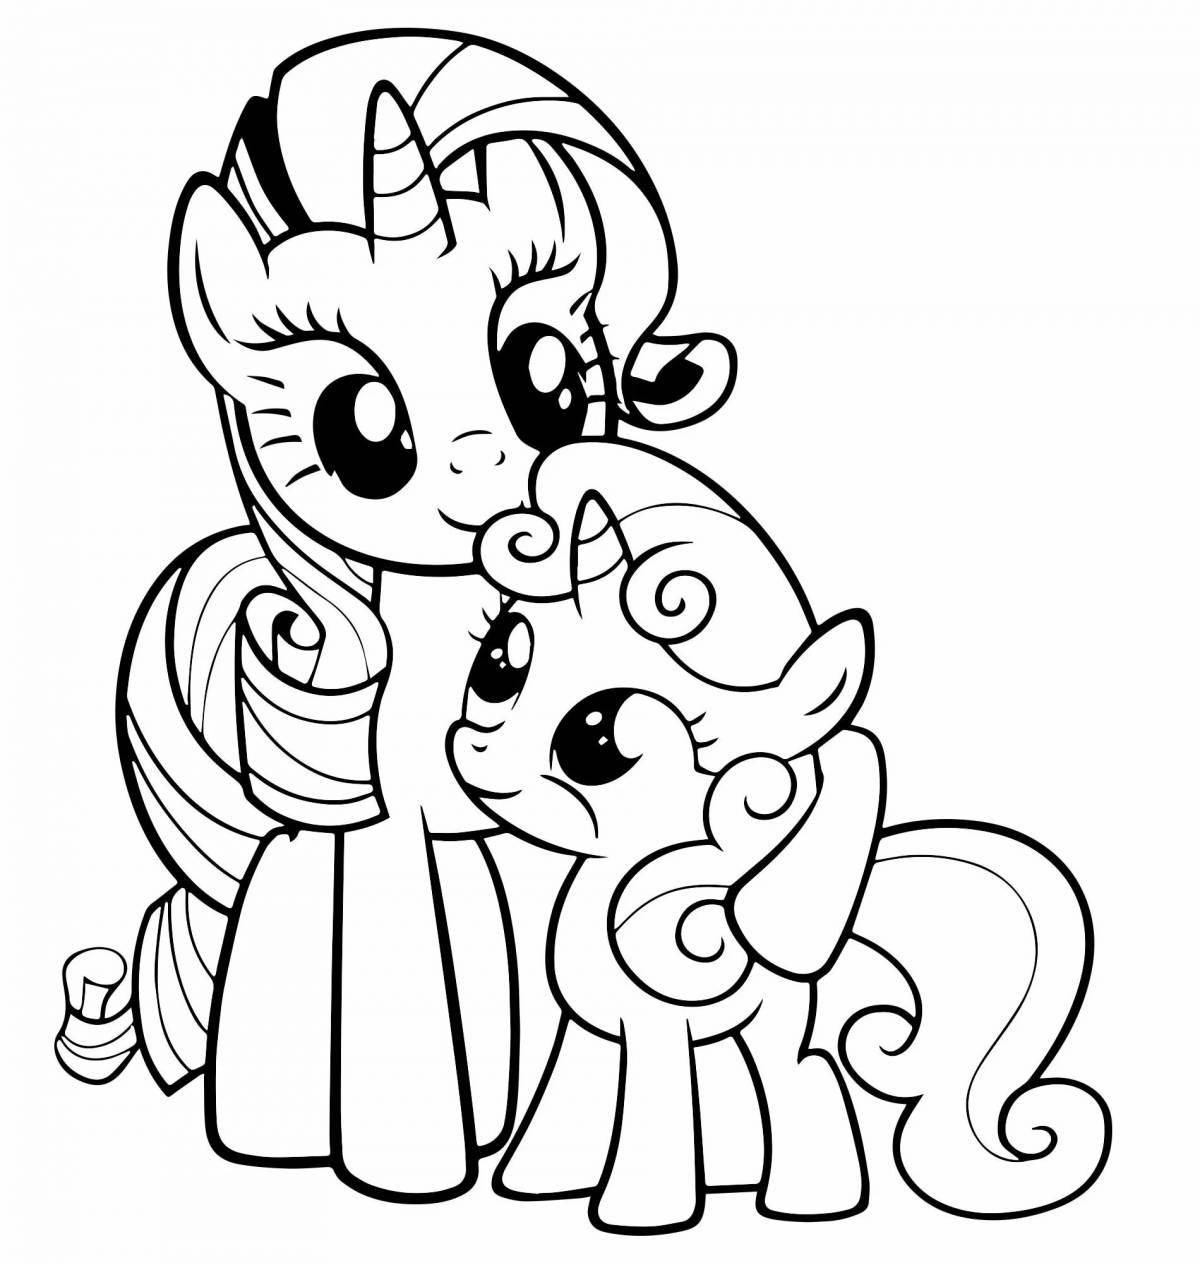 Moo little pony magic coloring book